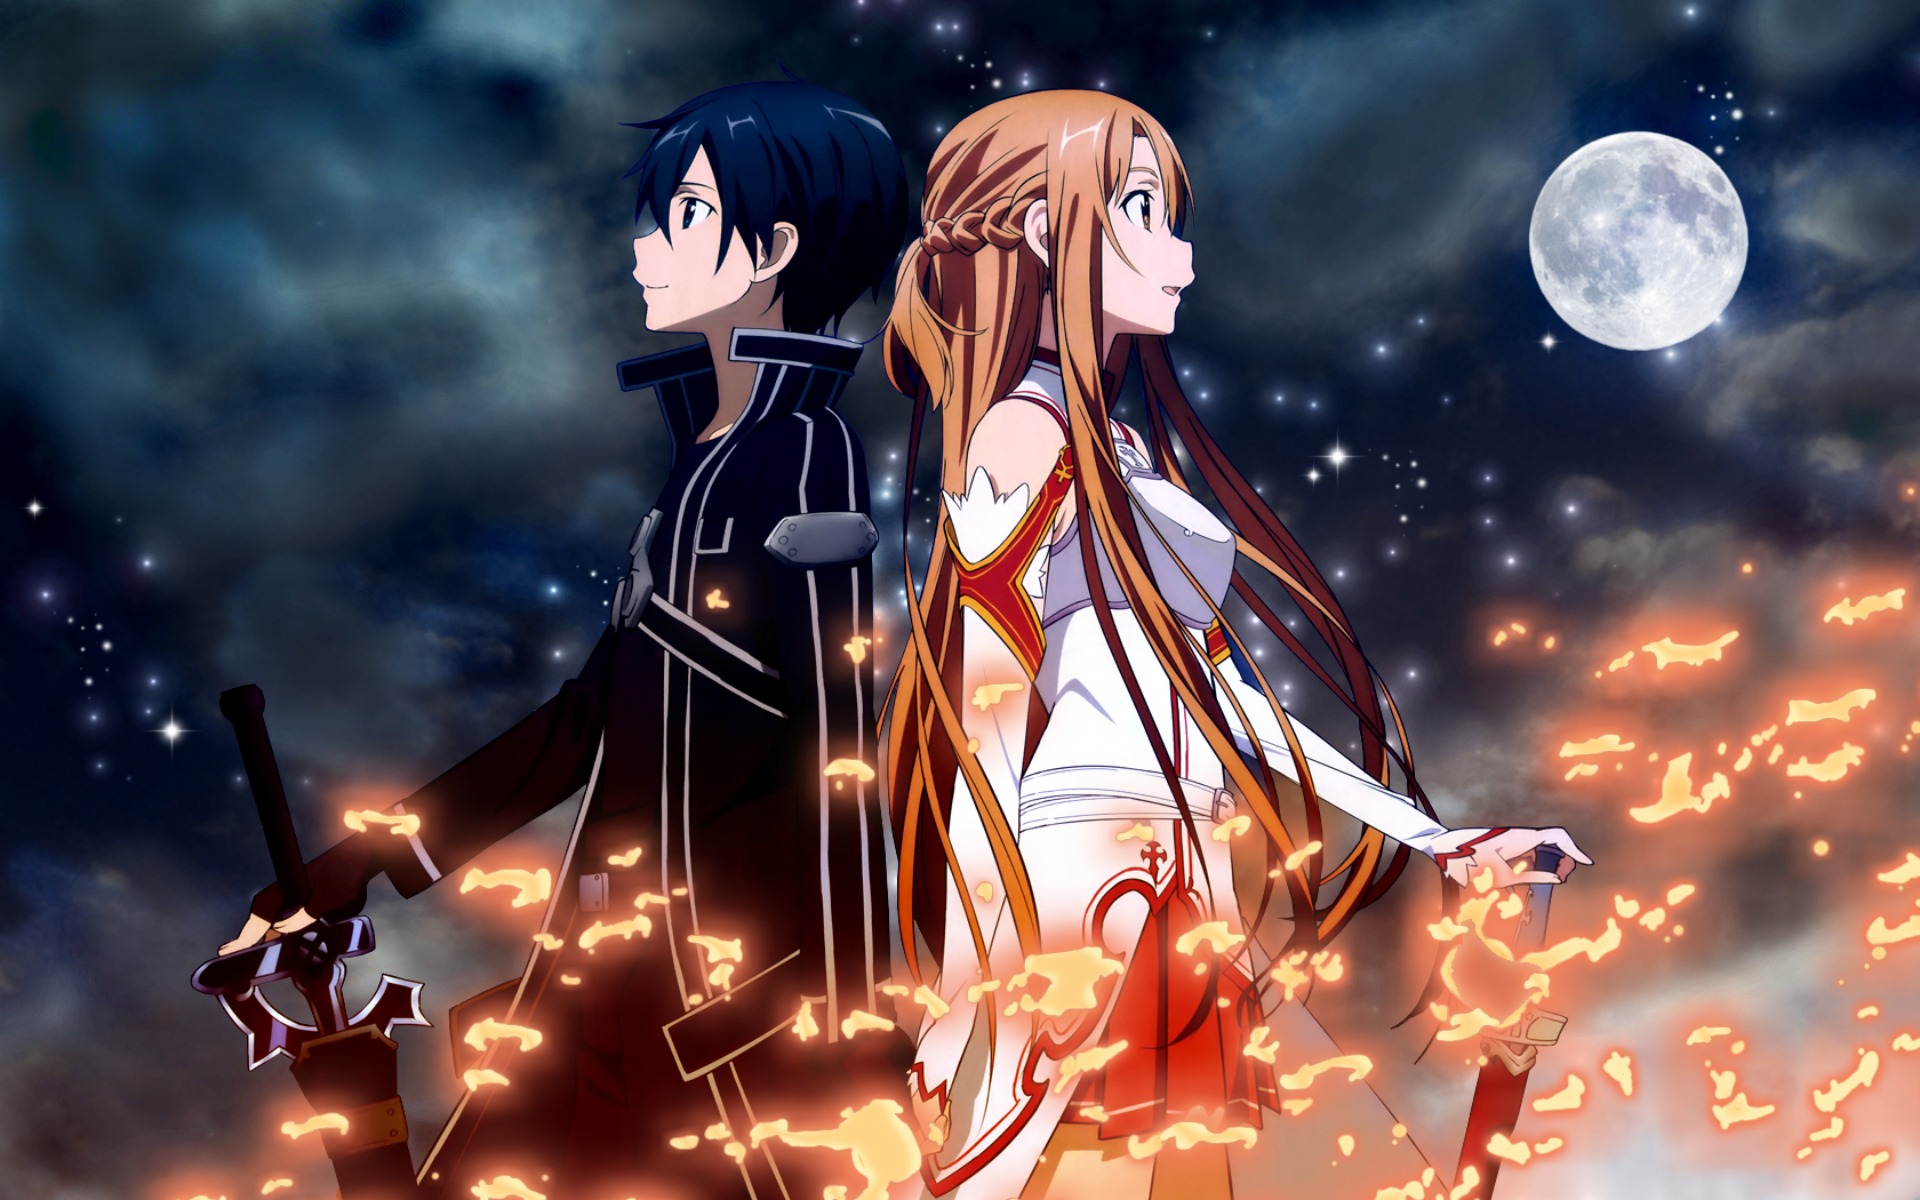 Sword Art Online images SAO HD wallpaper and background photos